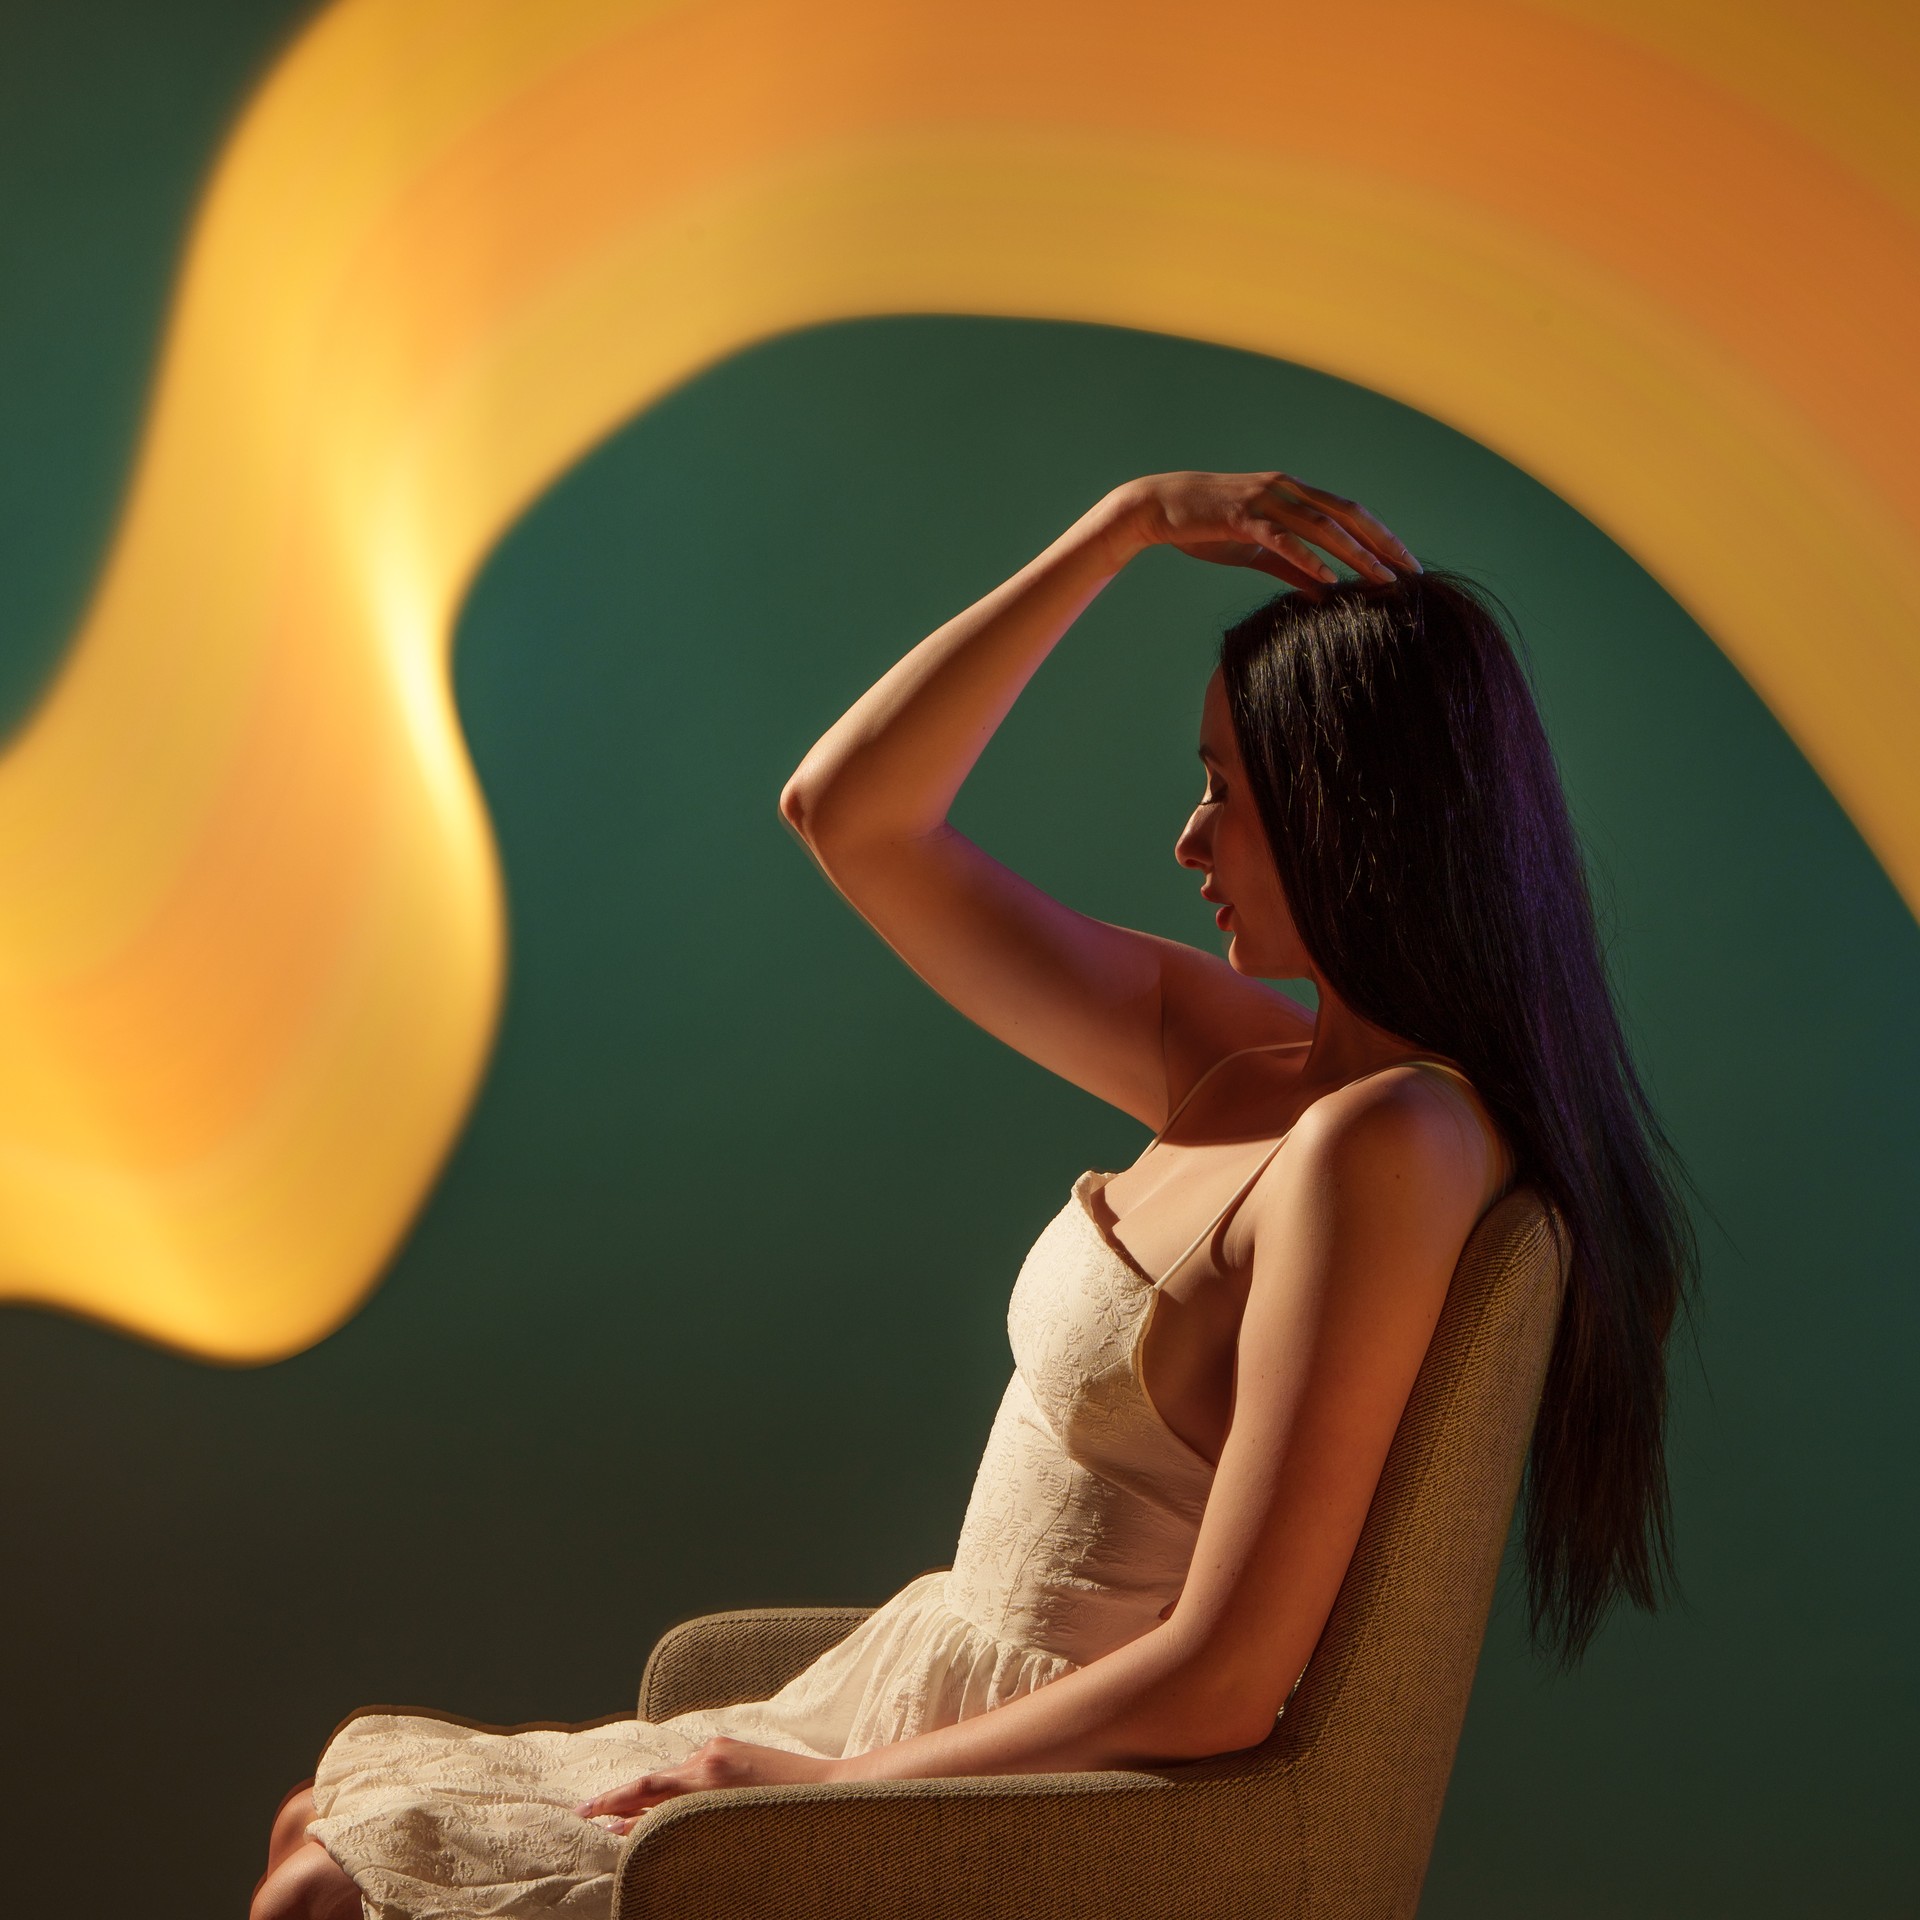 Light painting with model in chair